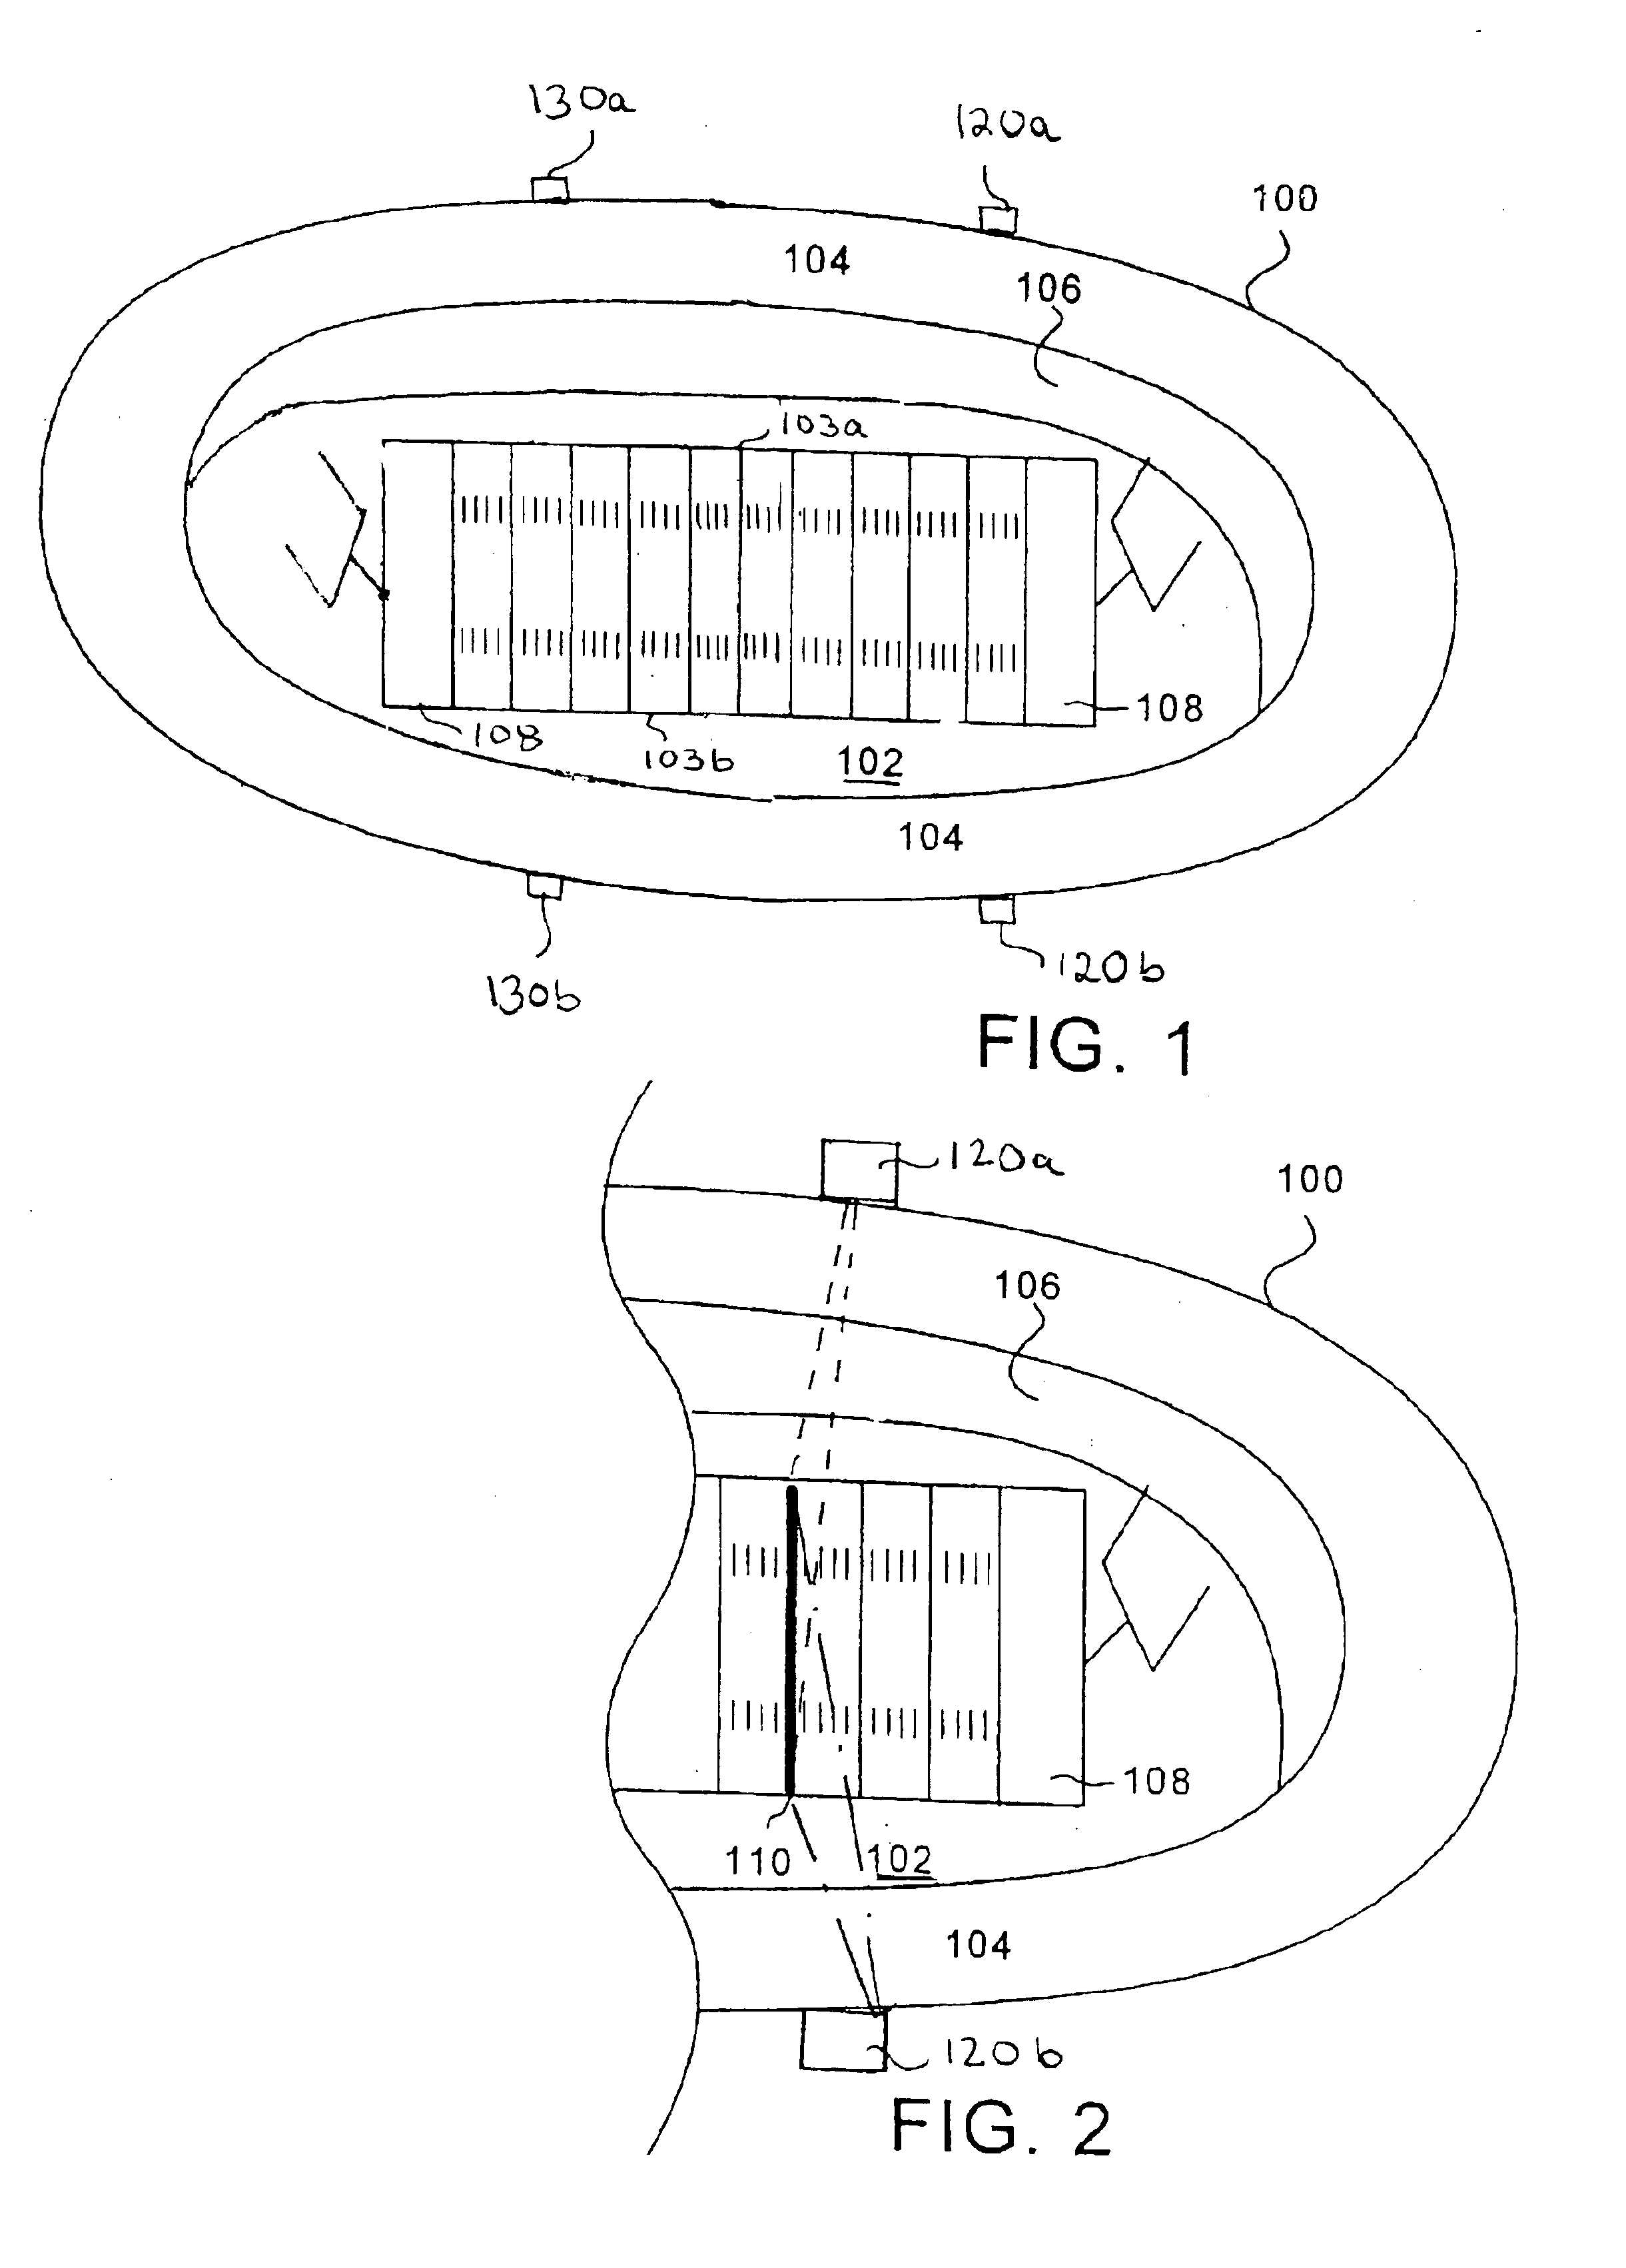 System for operating one or more lasers to project a visible line onto a surface